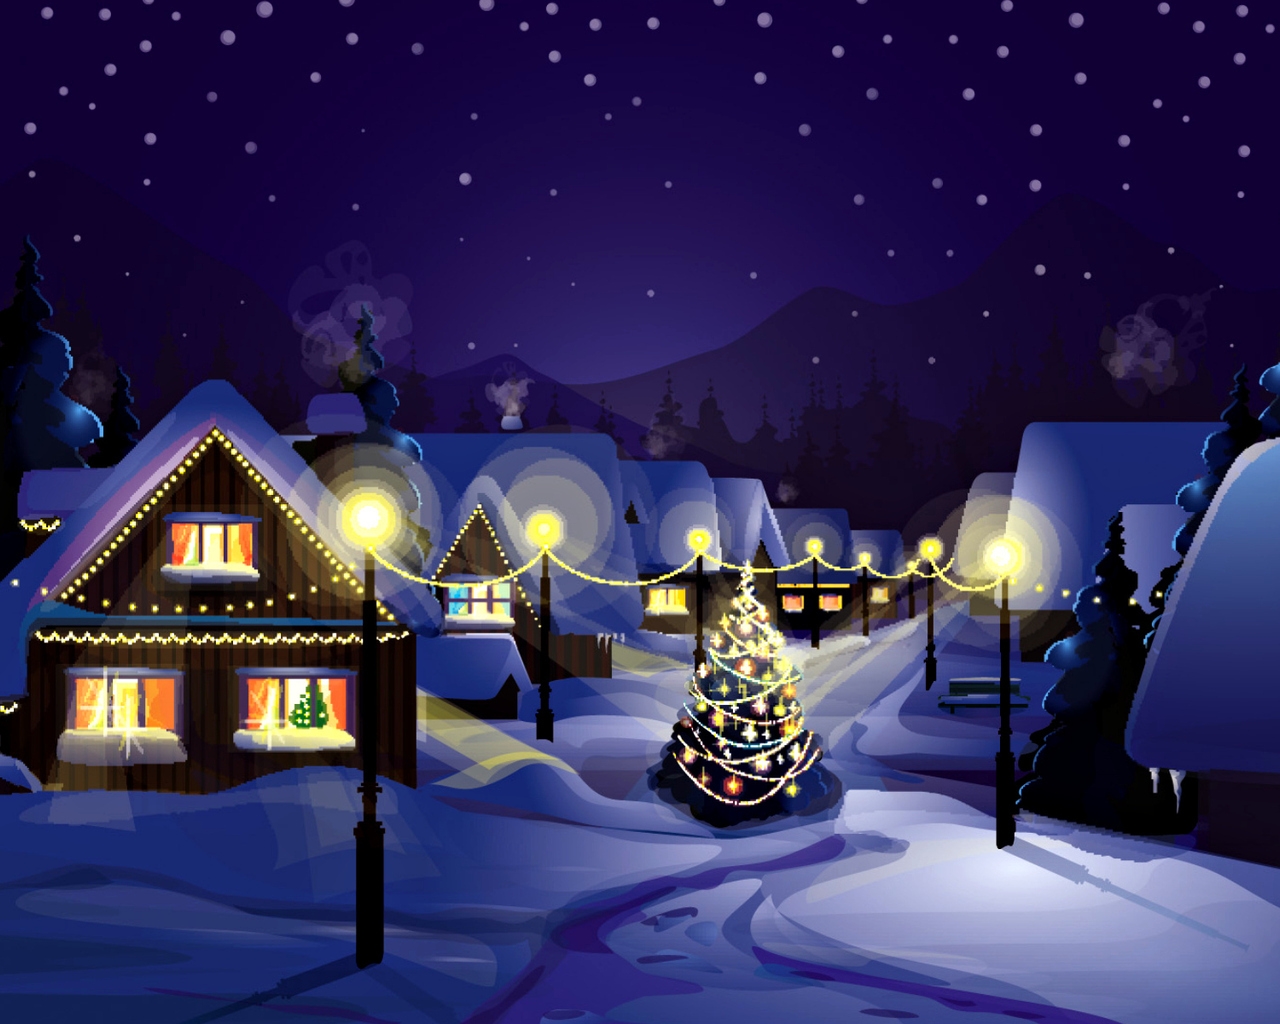 Christmas Village for 1280 x 1024 resolution